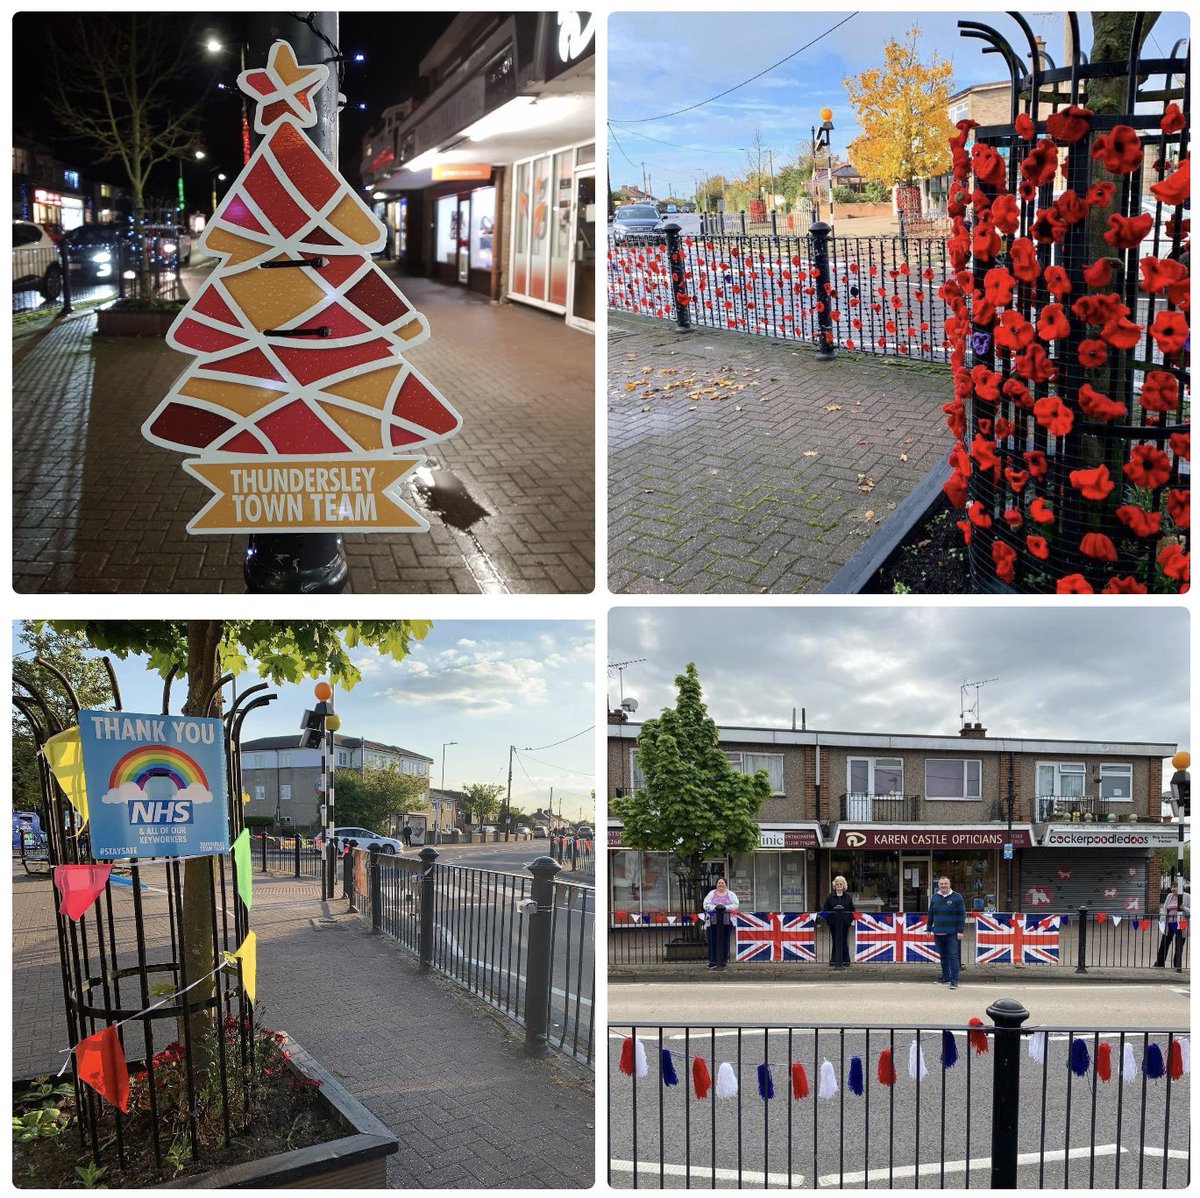 Whatever the season 🌱 🌞 🍂 ❄️ #Thundersley Town Team are always working hard to keep our Village decorated for important events and fundraisers. We have a busy December 🎄 planned with lots of festive projects to keep everyone’s spirits 🆙